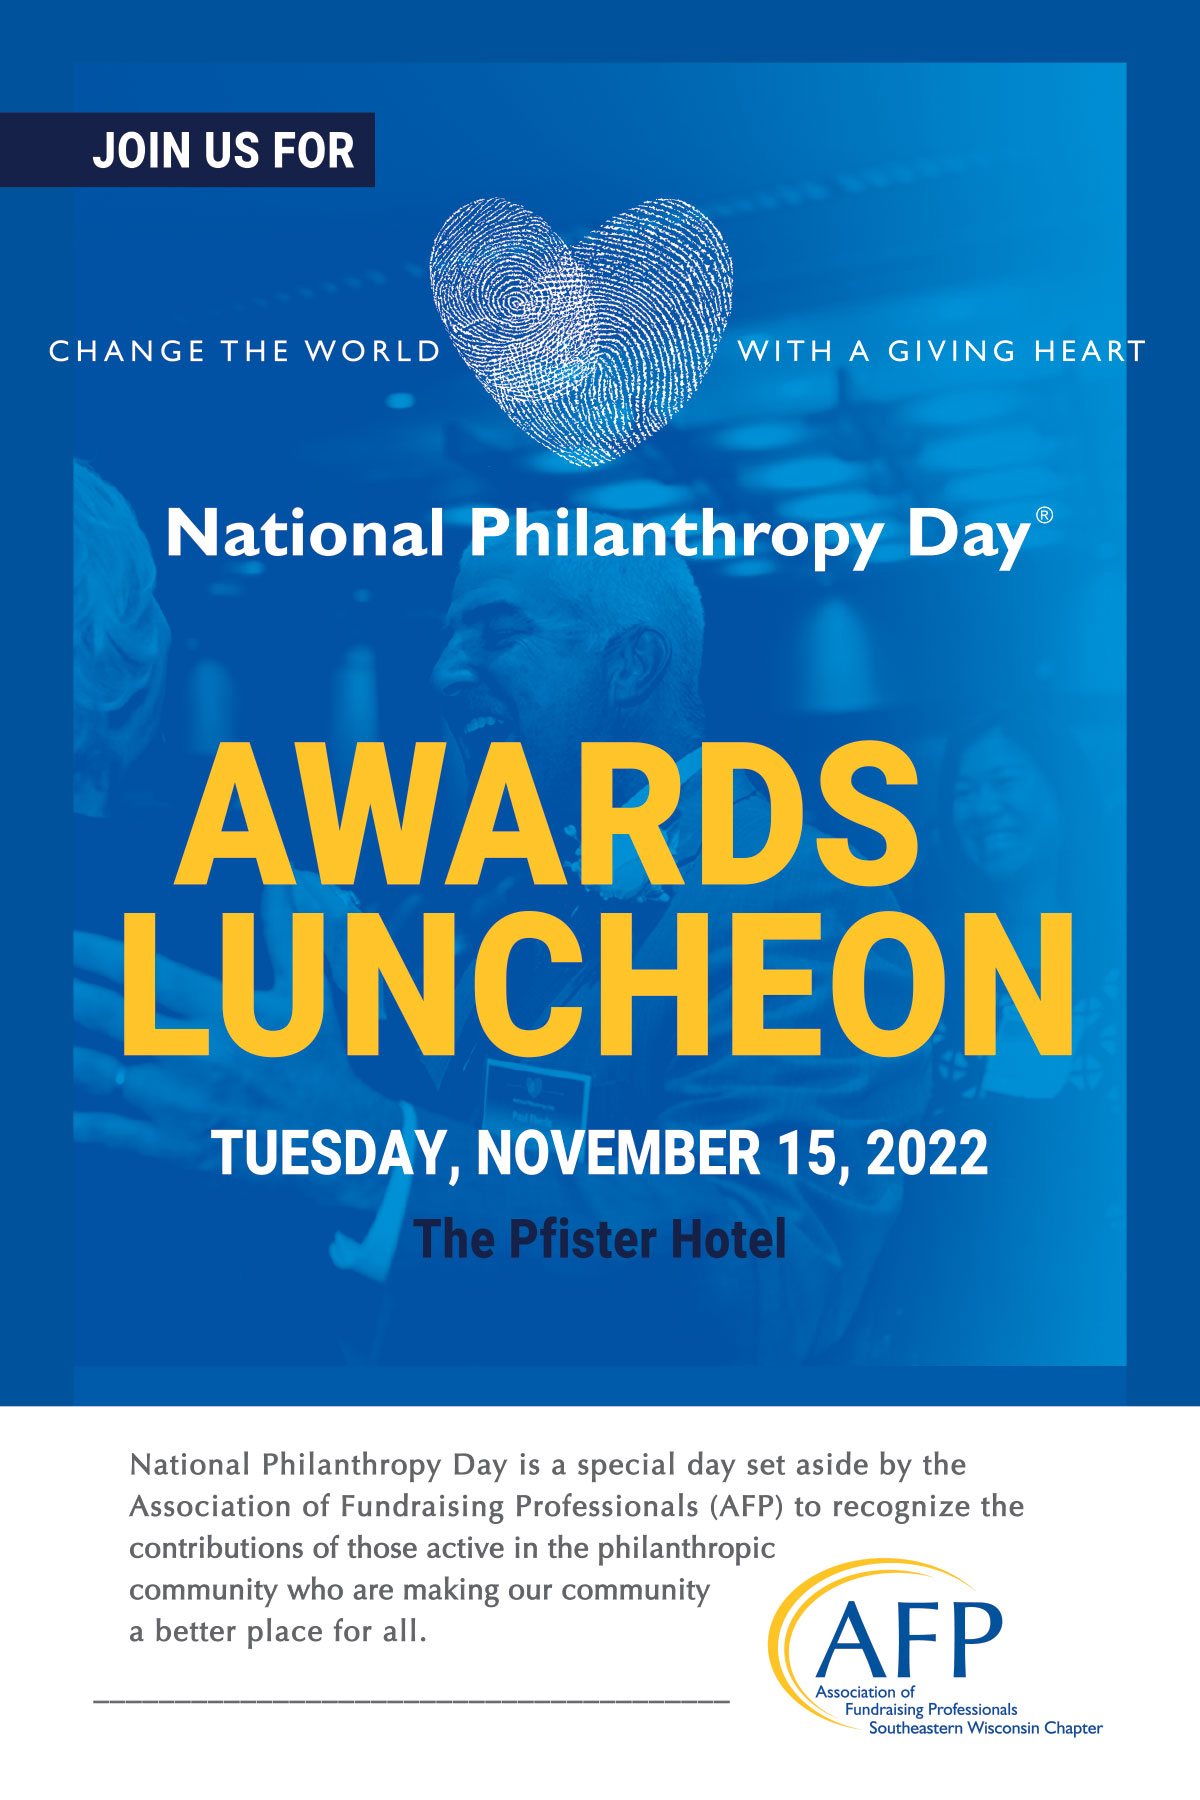 AFP Southeastern Wisconsin National Philanthropy Day 2022